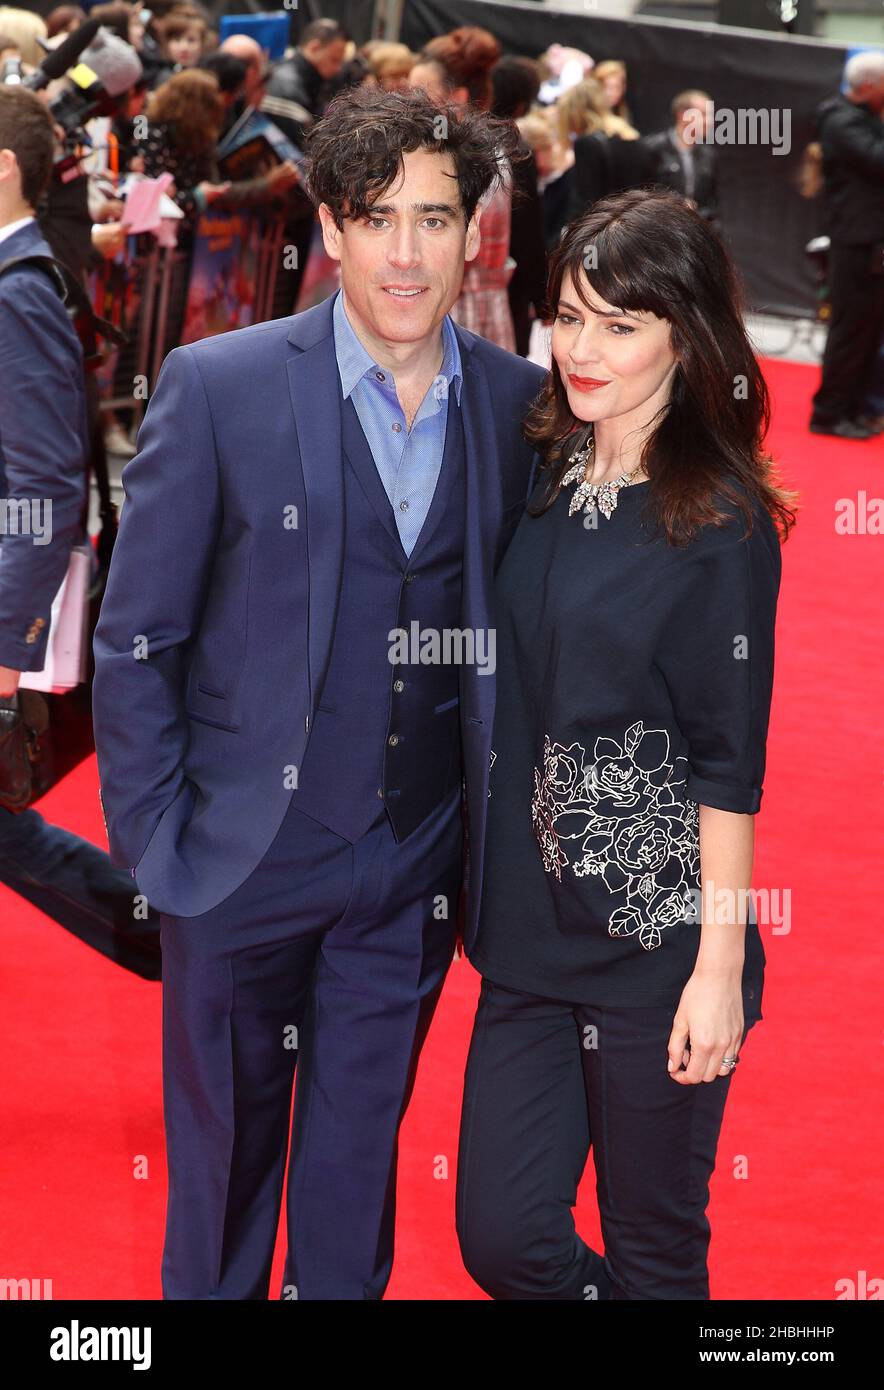 Stephen Mangan and Louise Delamere attending the Postman Pat The Movie World Premier at The West End Odeon in Leicester Square in London. Stock Photo